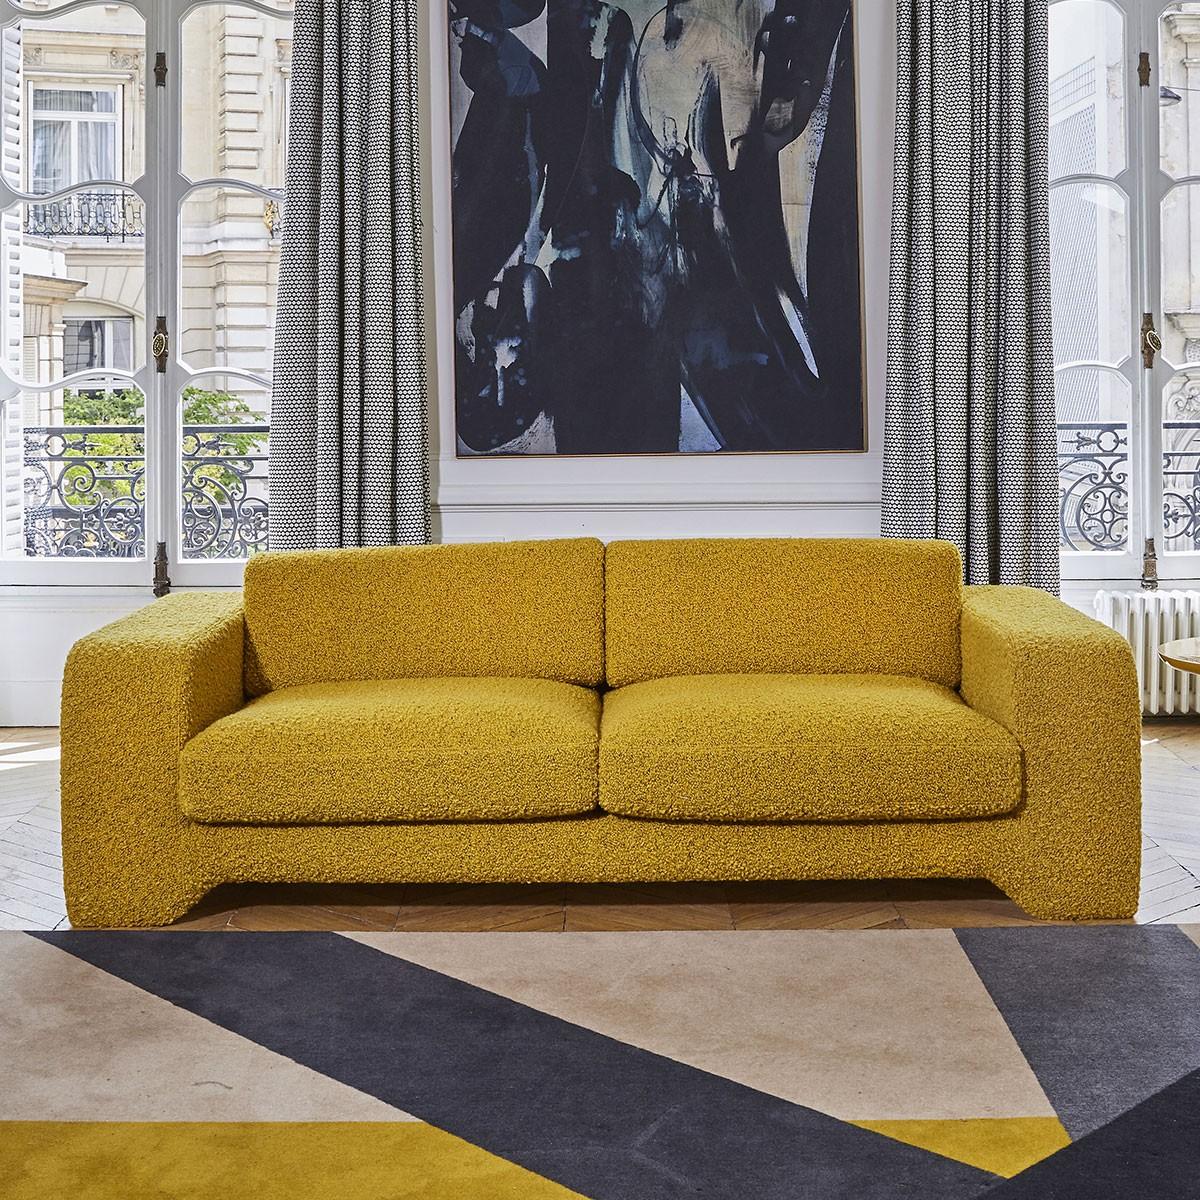 Popus editions Giovanna 4 seater sofa in mole como velvet upholstery.

Giovanna is a sofa with a strong profile. A sober, plush line, with this famous detail that changes everything, so as not to forget its strength of character and this charming